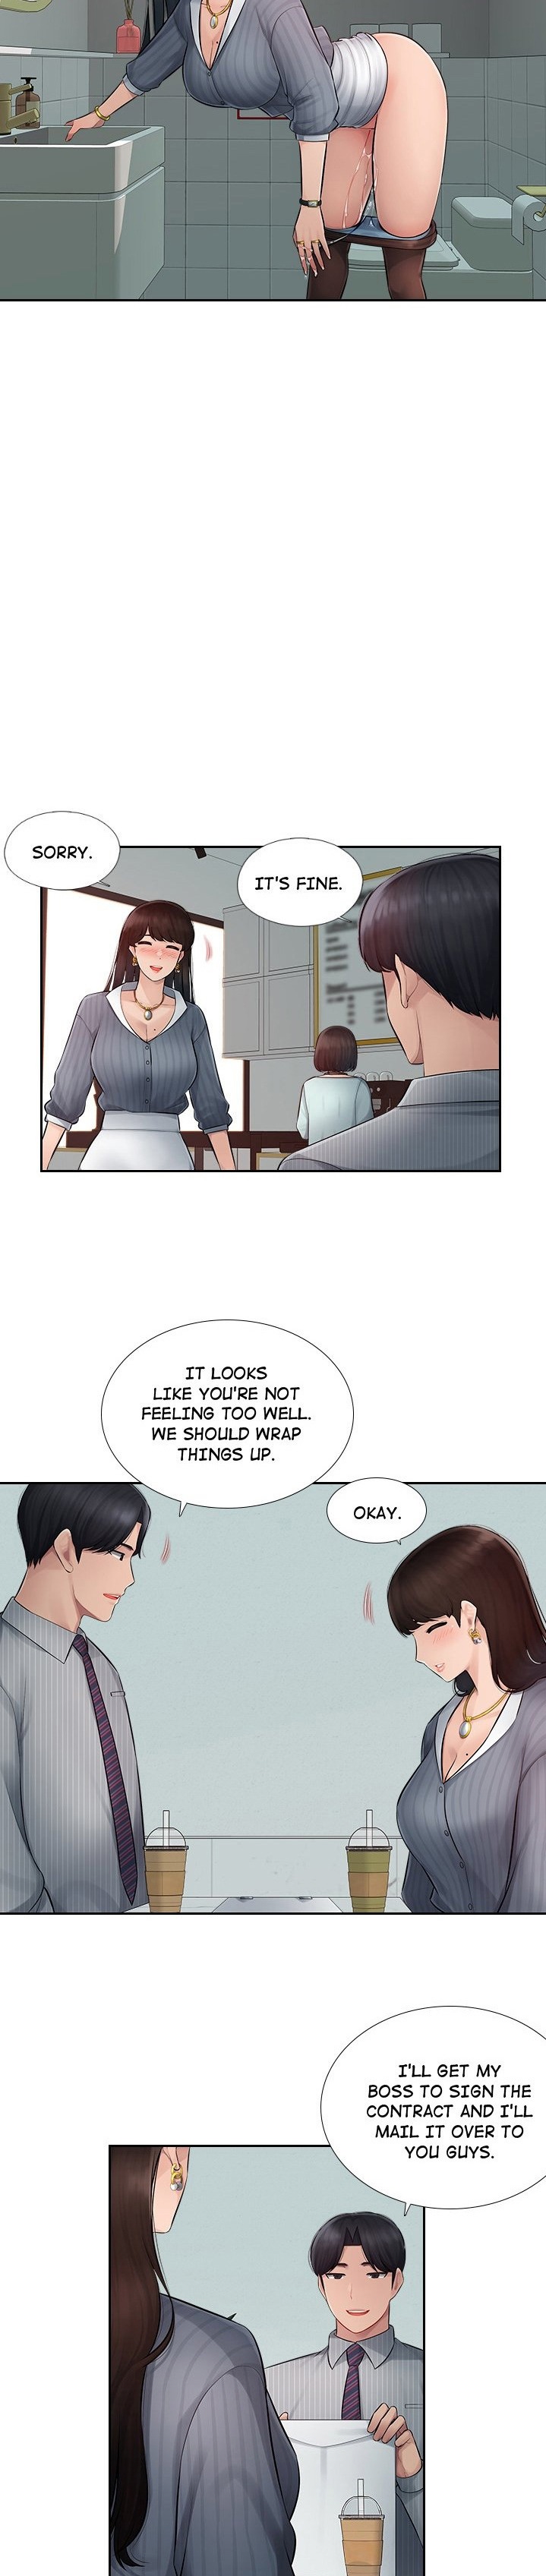 Office Desires Chapter 1 - Page 15